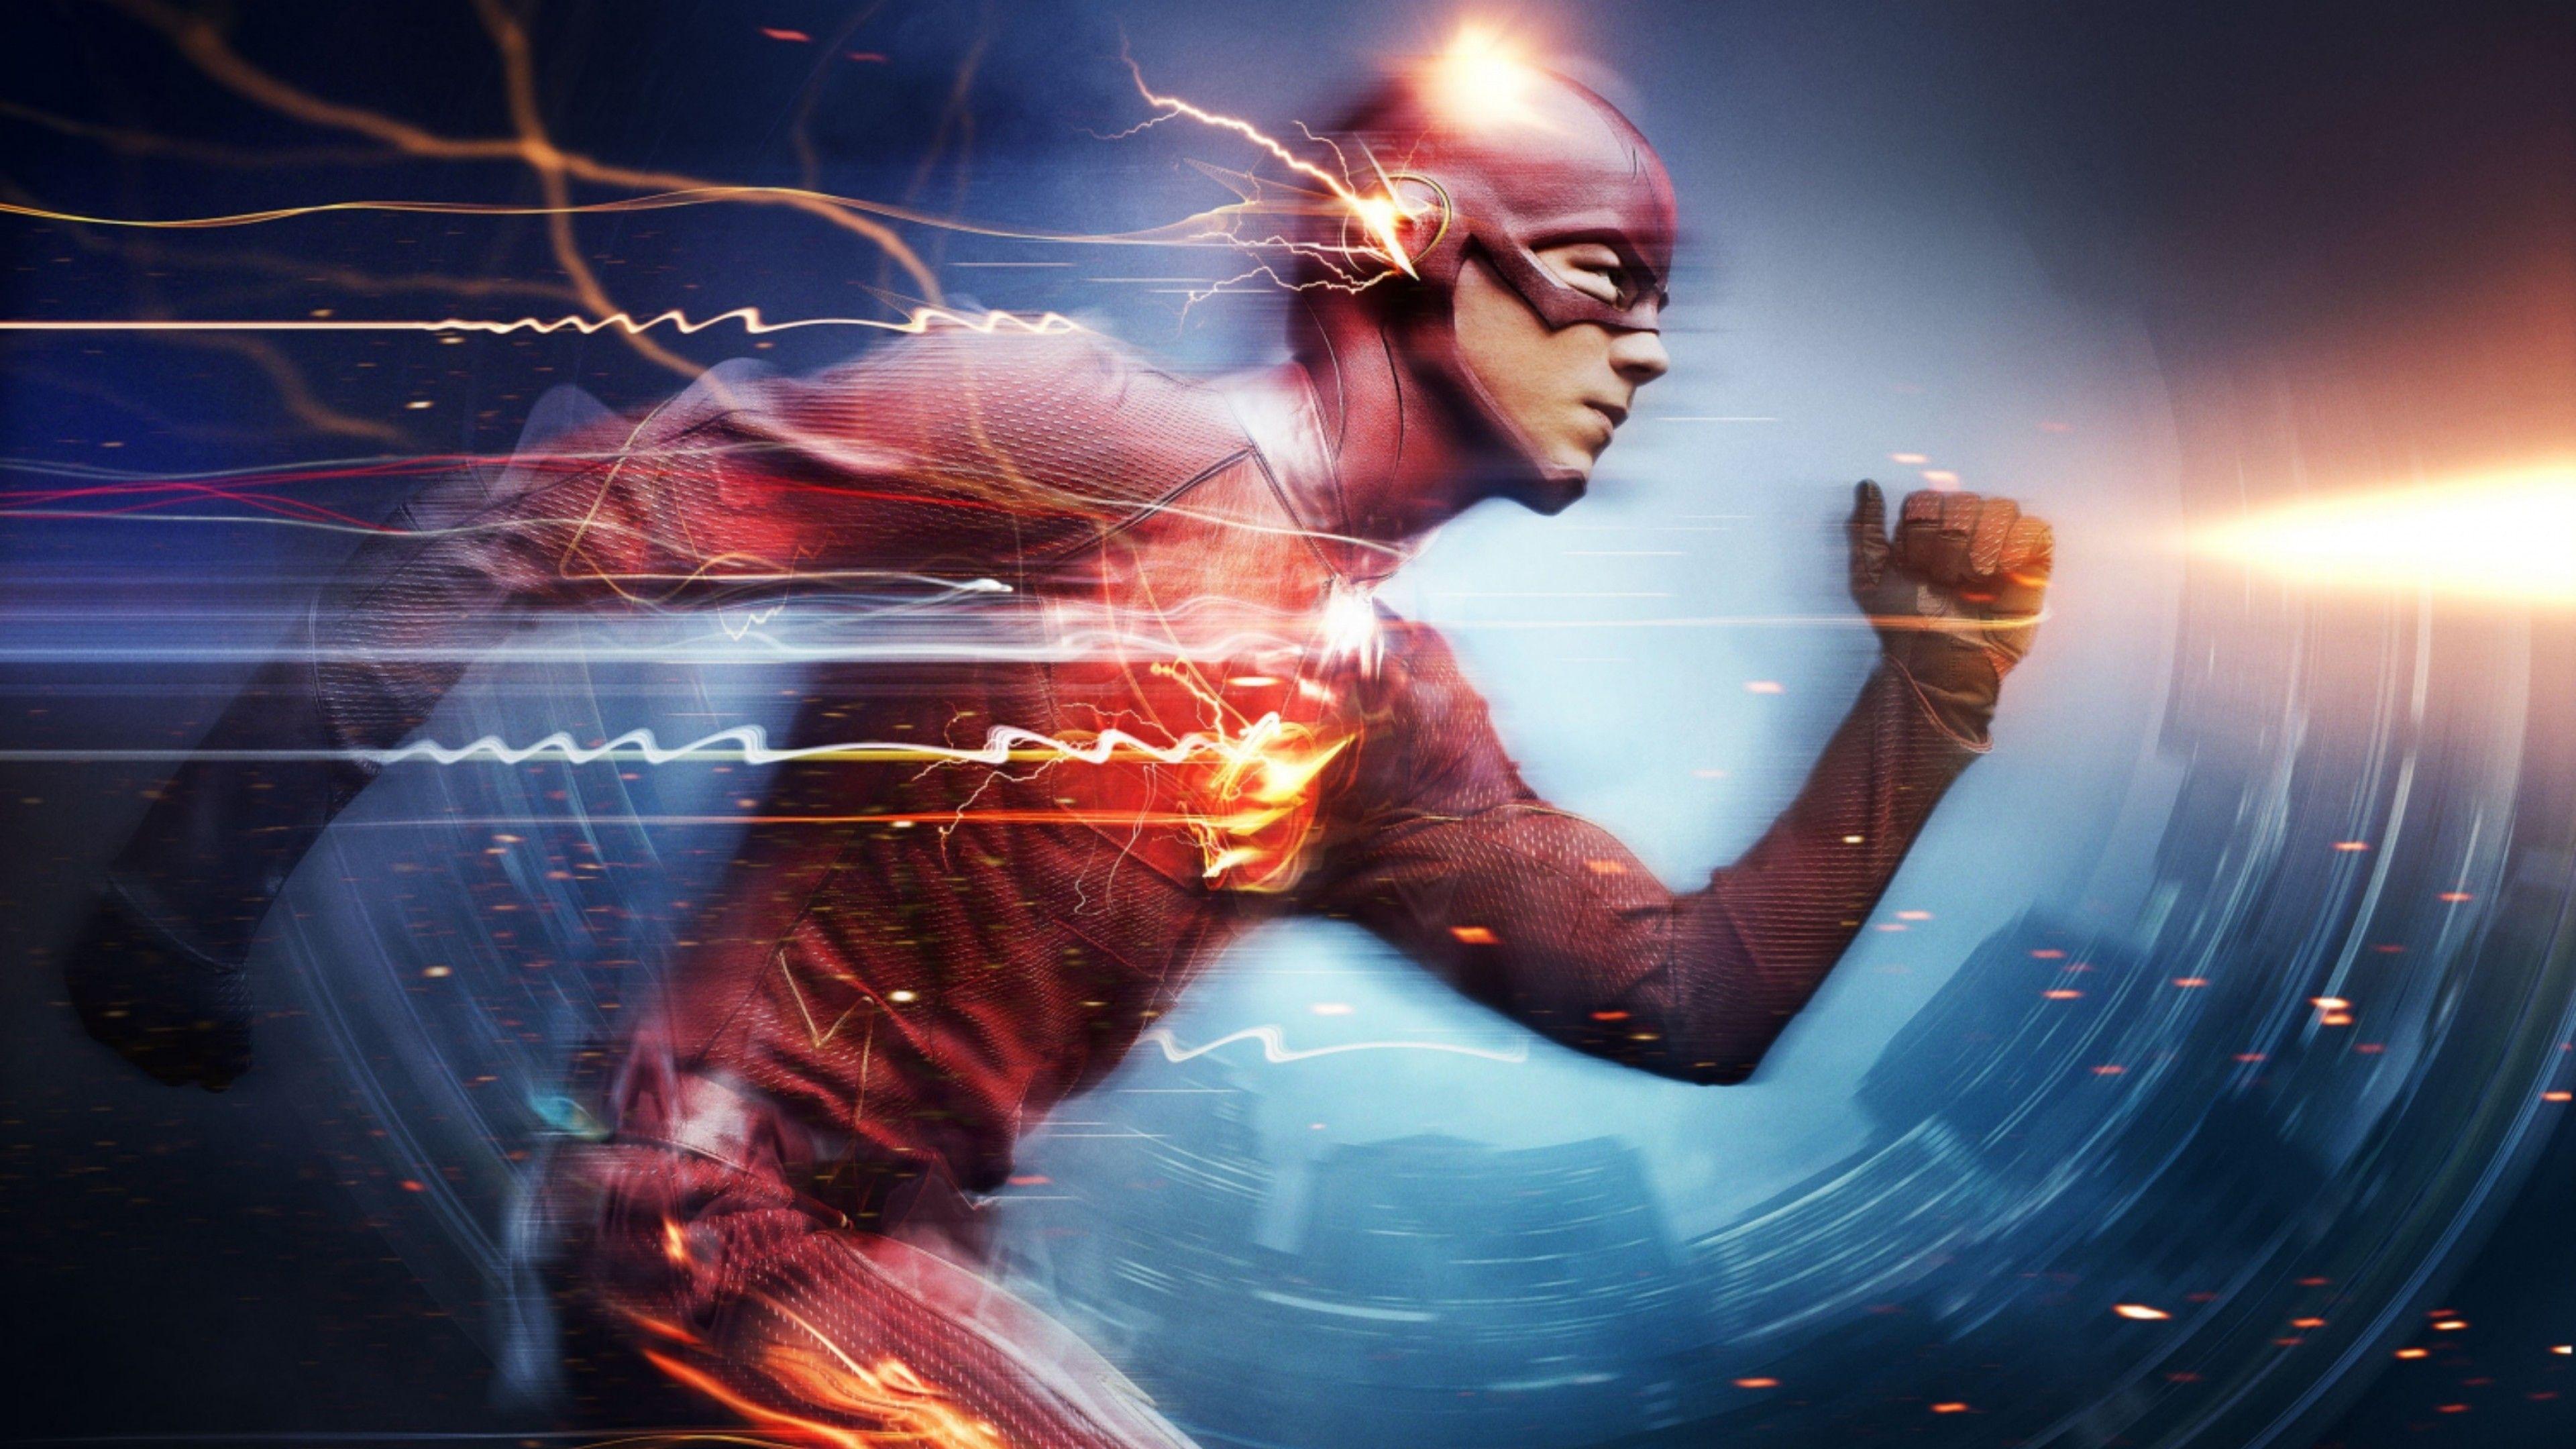 The Flash 4k Wallpapers Top Free The Flash 4k Backgrounds Wallpaperaccess